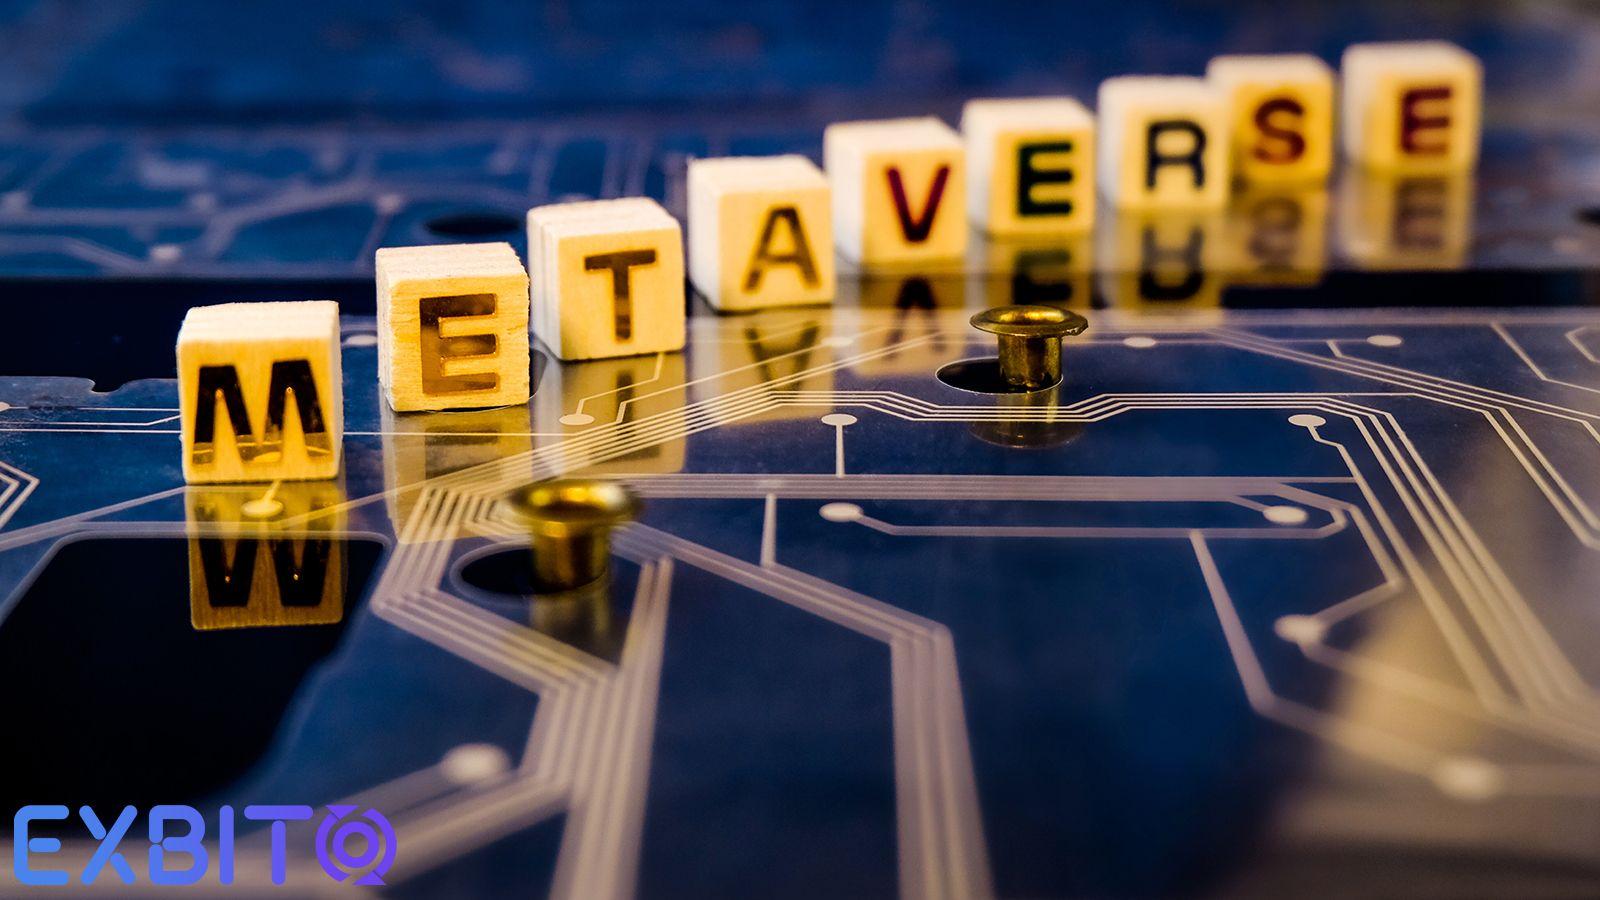 what is metaverse